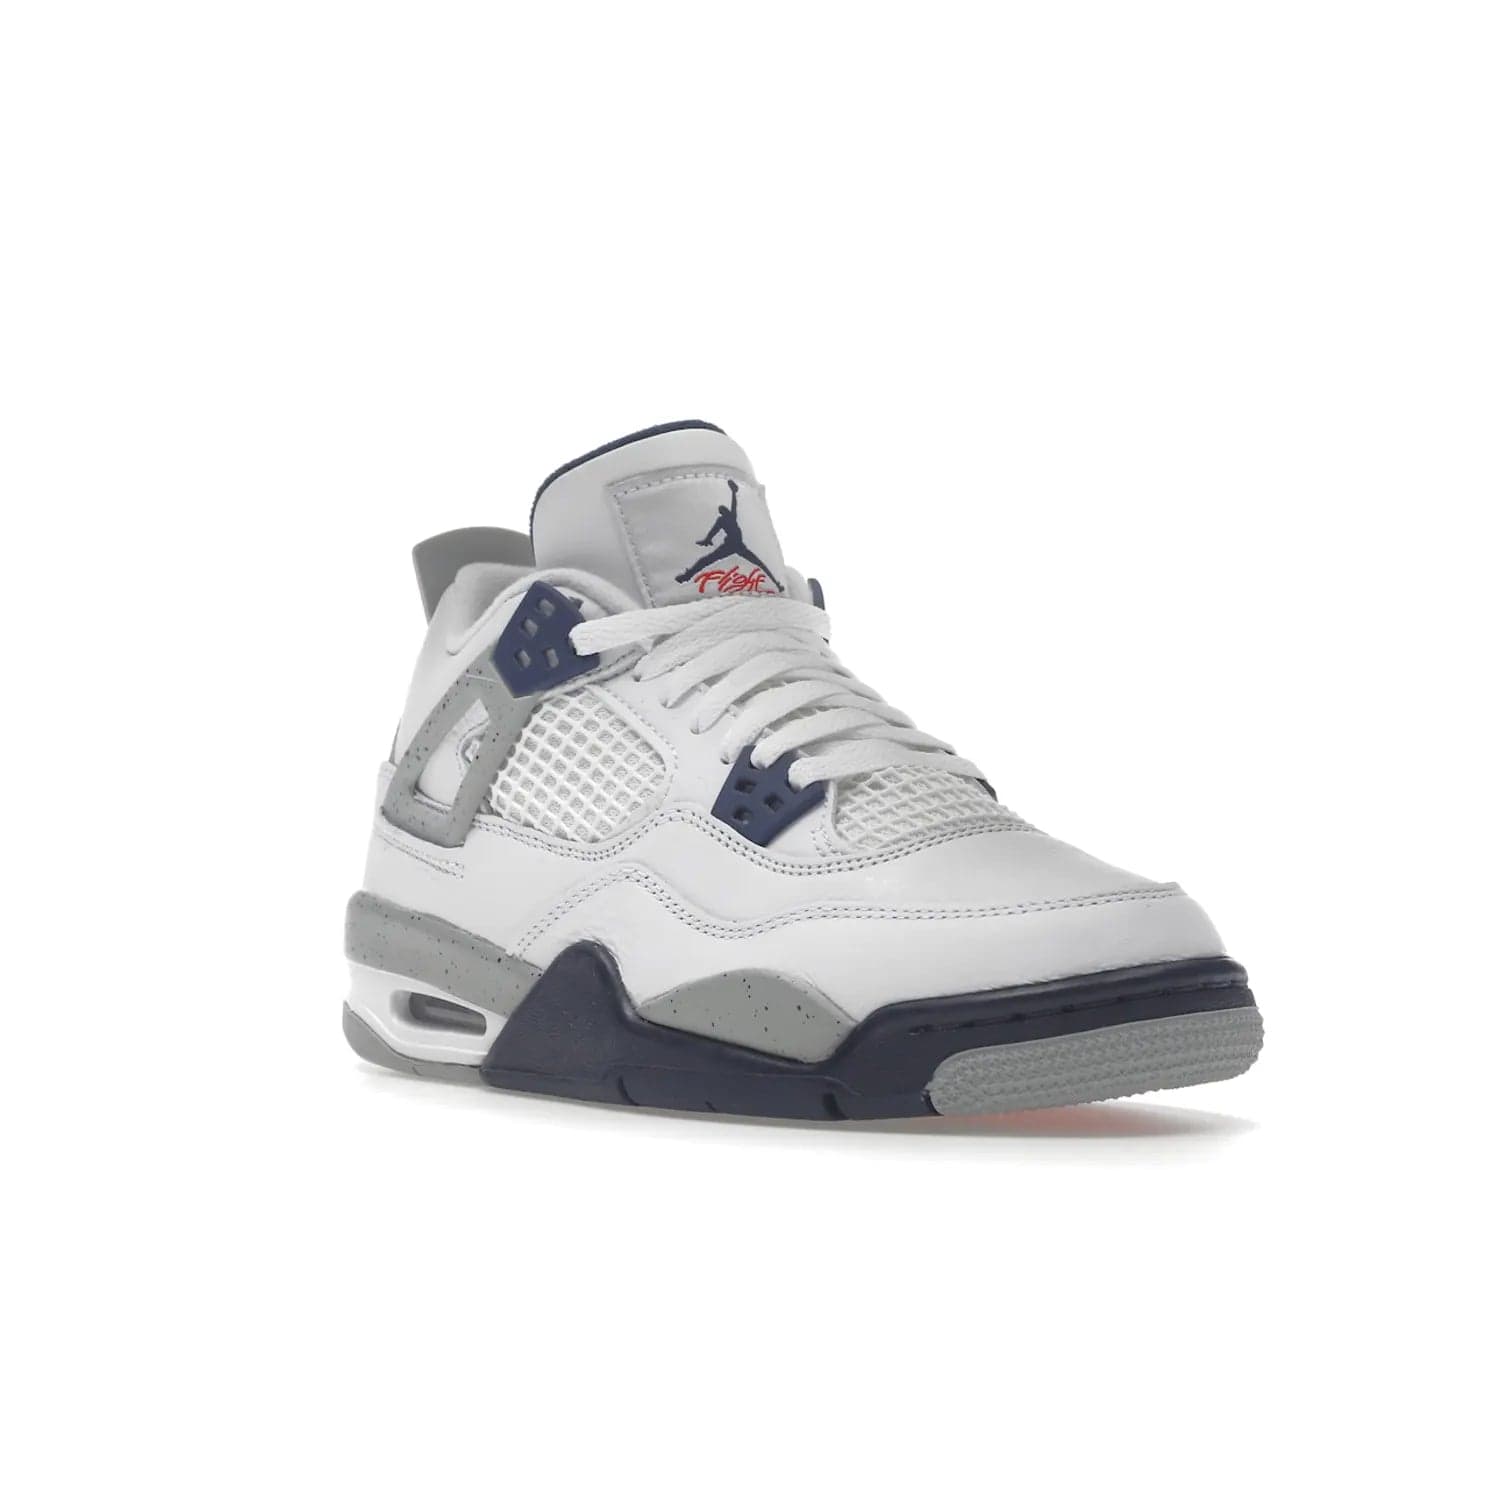 Jordan 4 Retro Midnight Navy (GS) - Image 6 - Only at www.BallersClubKickz.com - Shop the Air Jordan 4 Retro Midnight Navy GS. The white leather upper features black support wings & heel tab, navy eyelets & woven tongue tag with Jumpman logos. The midsole features two-tone polyurethane insole & AIR units in the heel & forefoot. Get the white/midnight navy/light smoke grey/fire colorway & show off your style.